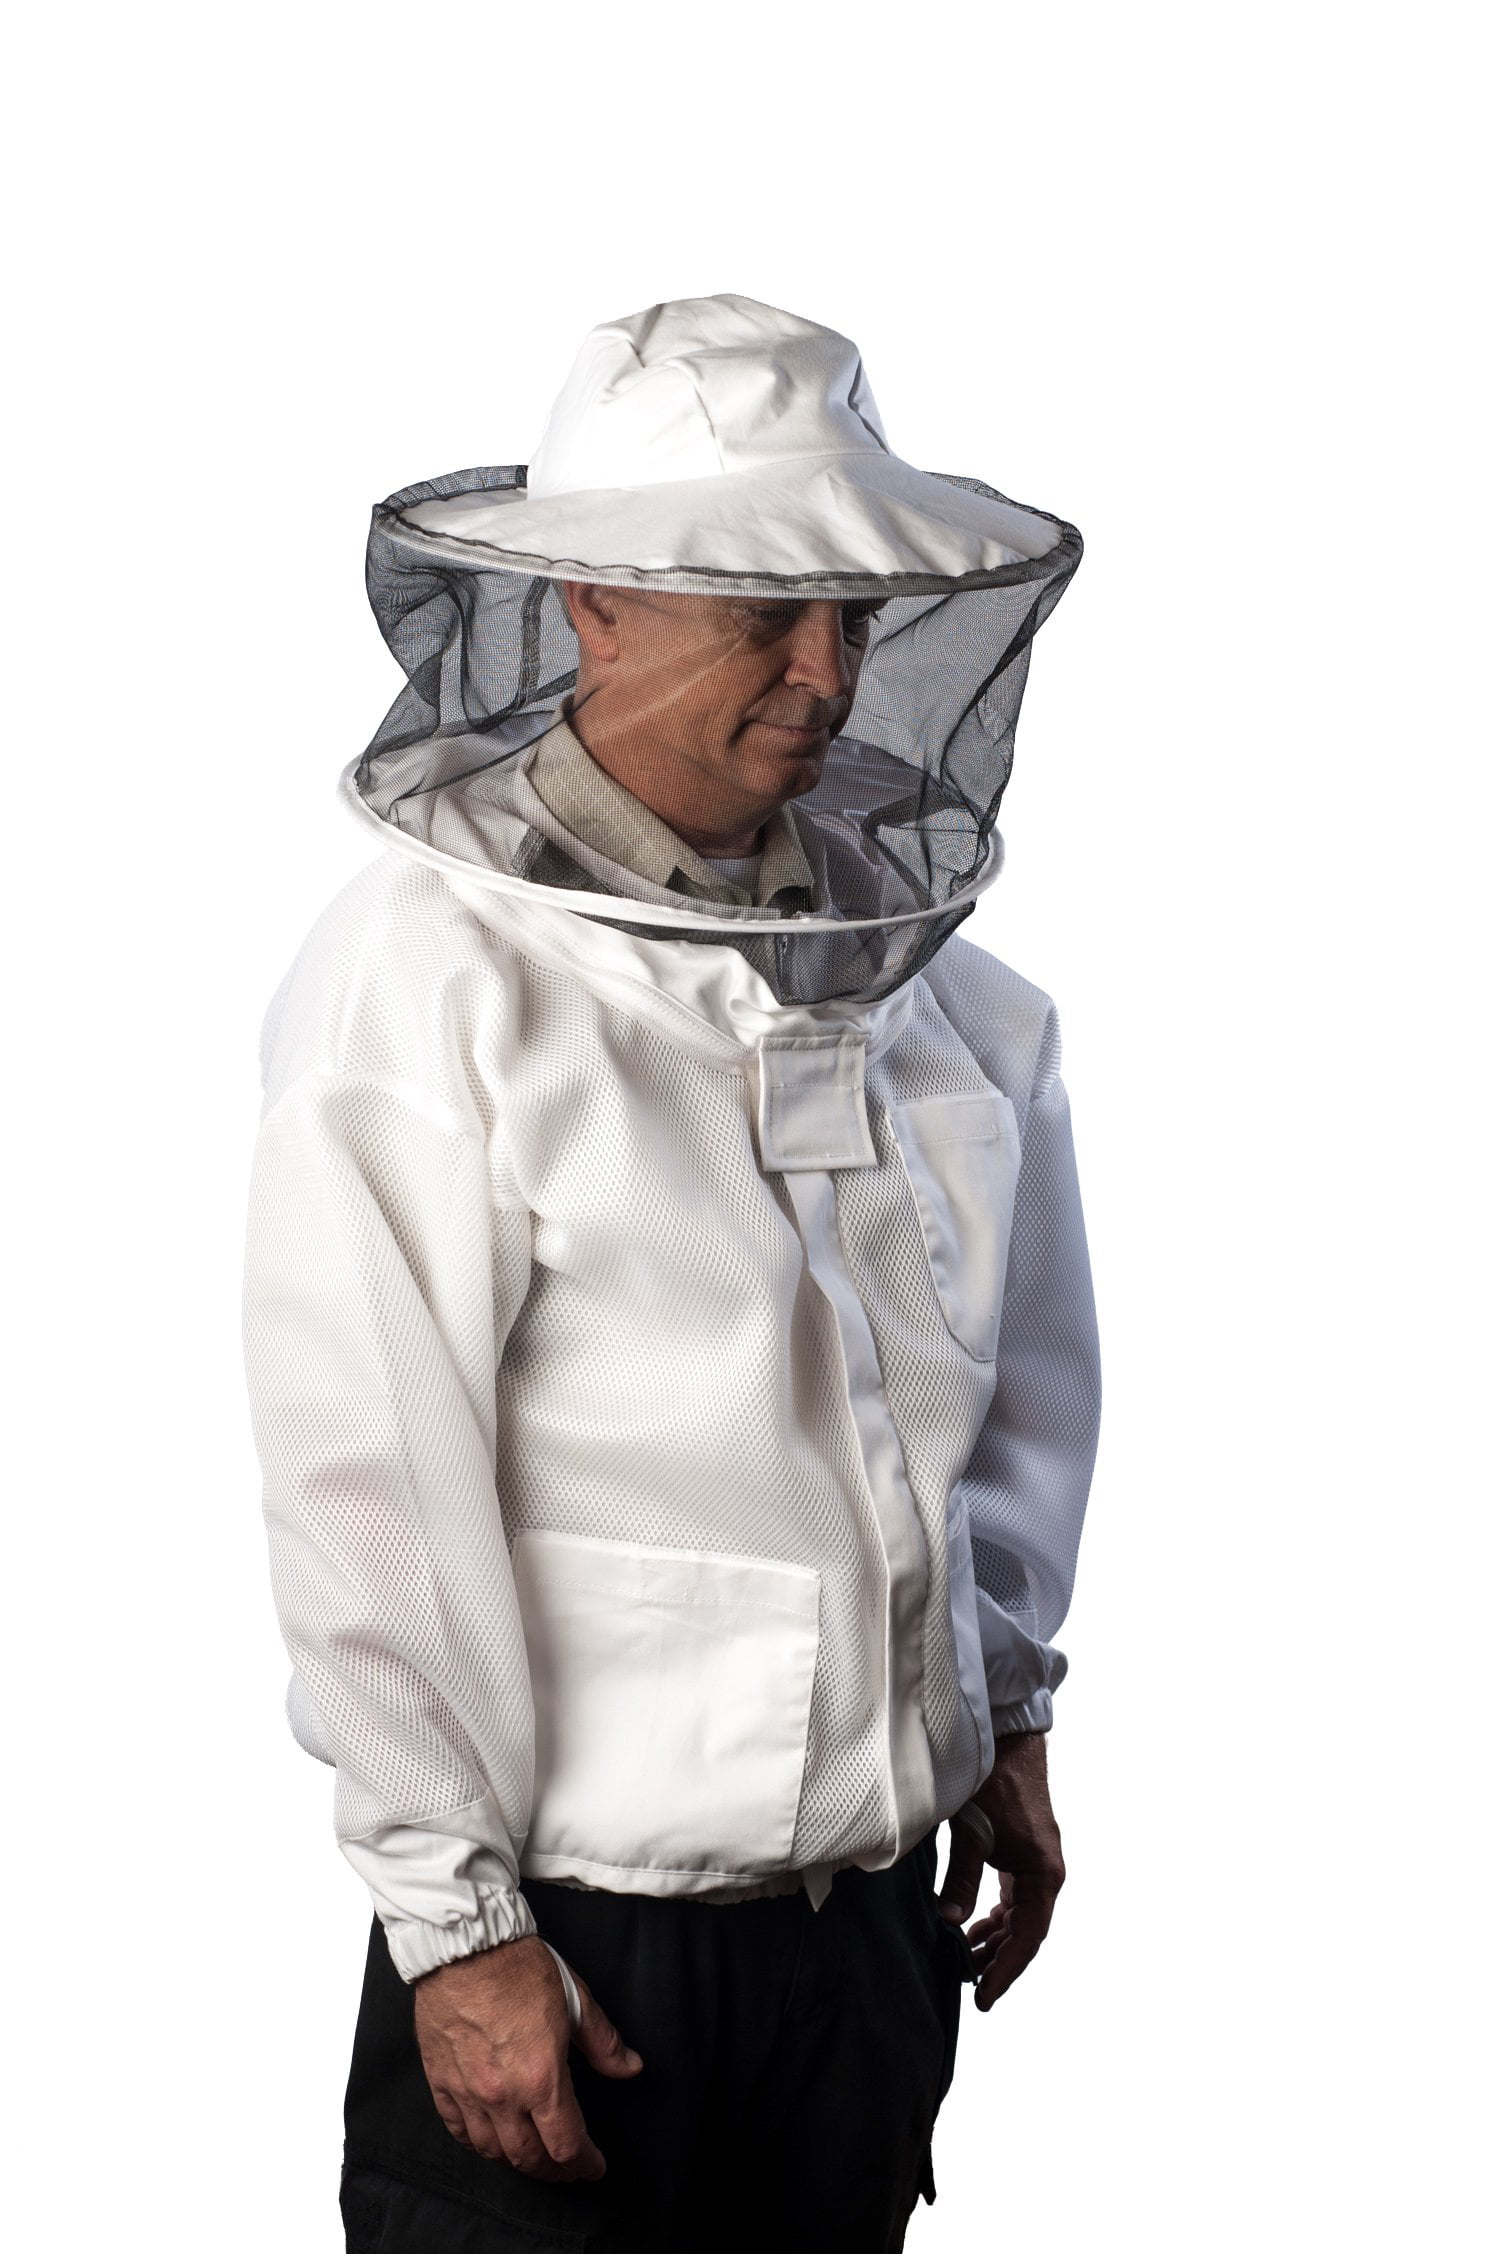 Adult 2XL - Jacket Thumb Elastic Pull Over Smock| with Veil Forest Beekeeping Supply| Professional Beekeeper Jacket| Suit 